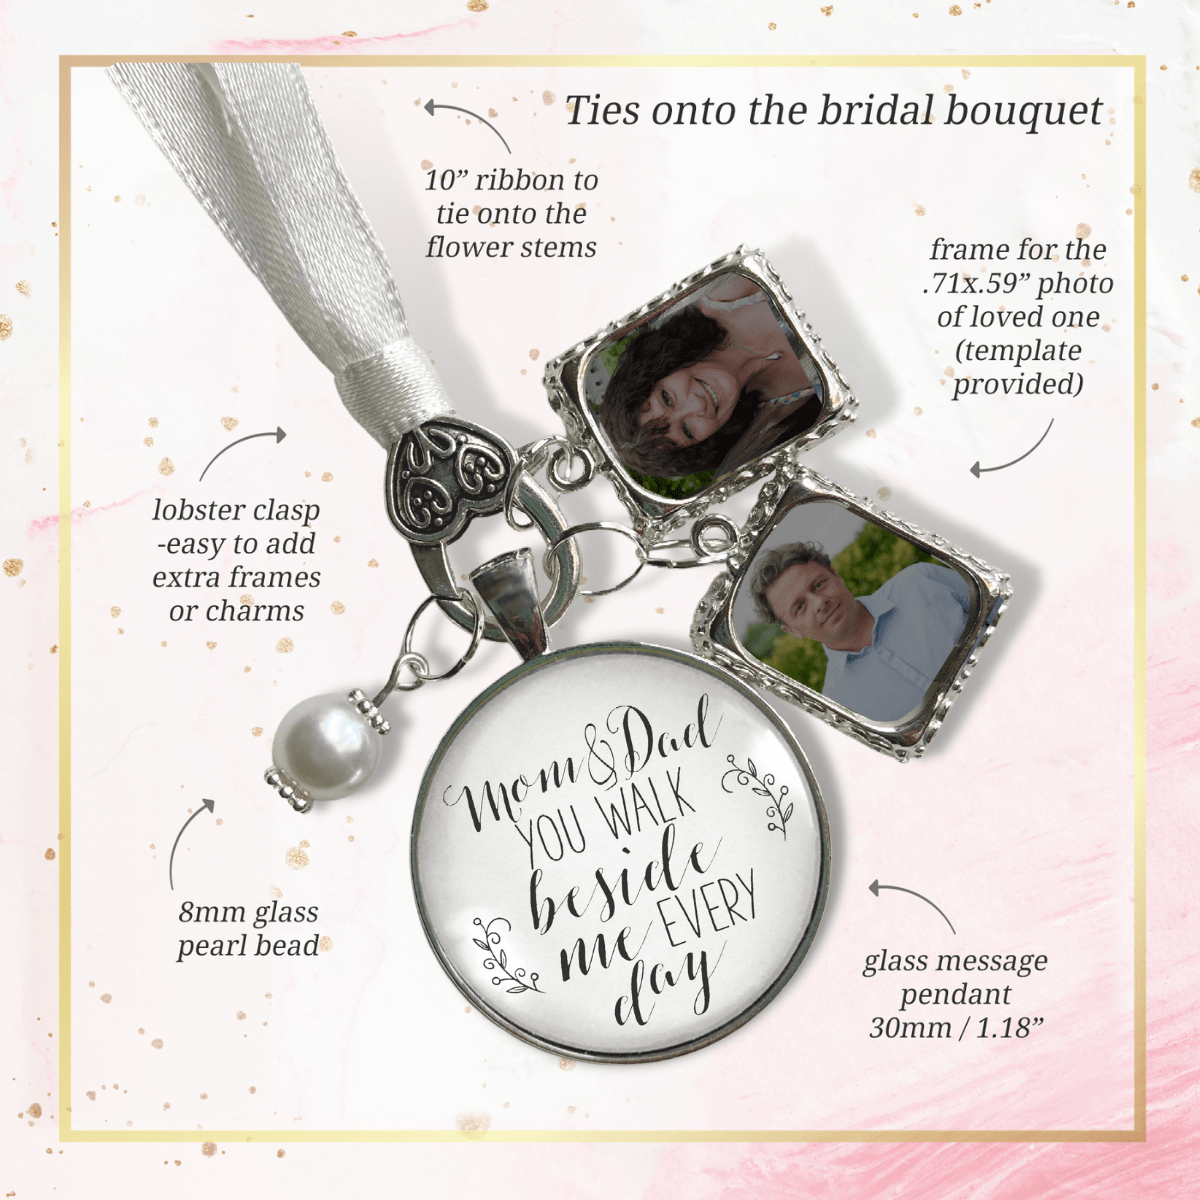 Bouquet Charm Mom And Dad Bride's Parents White Silver Finish 2 Frames Wedding Jewelry - Gutsy Goodness Handmade Jewelry Gifts